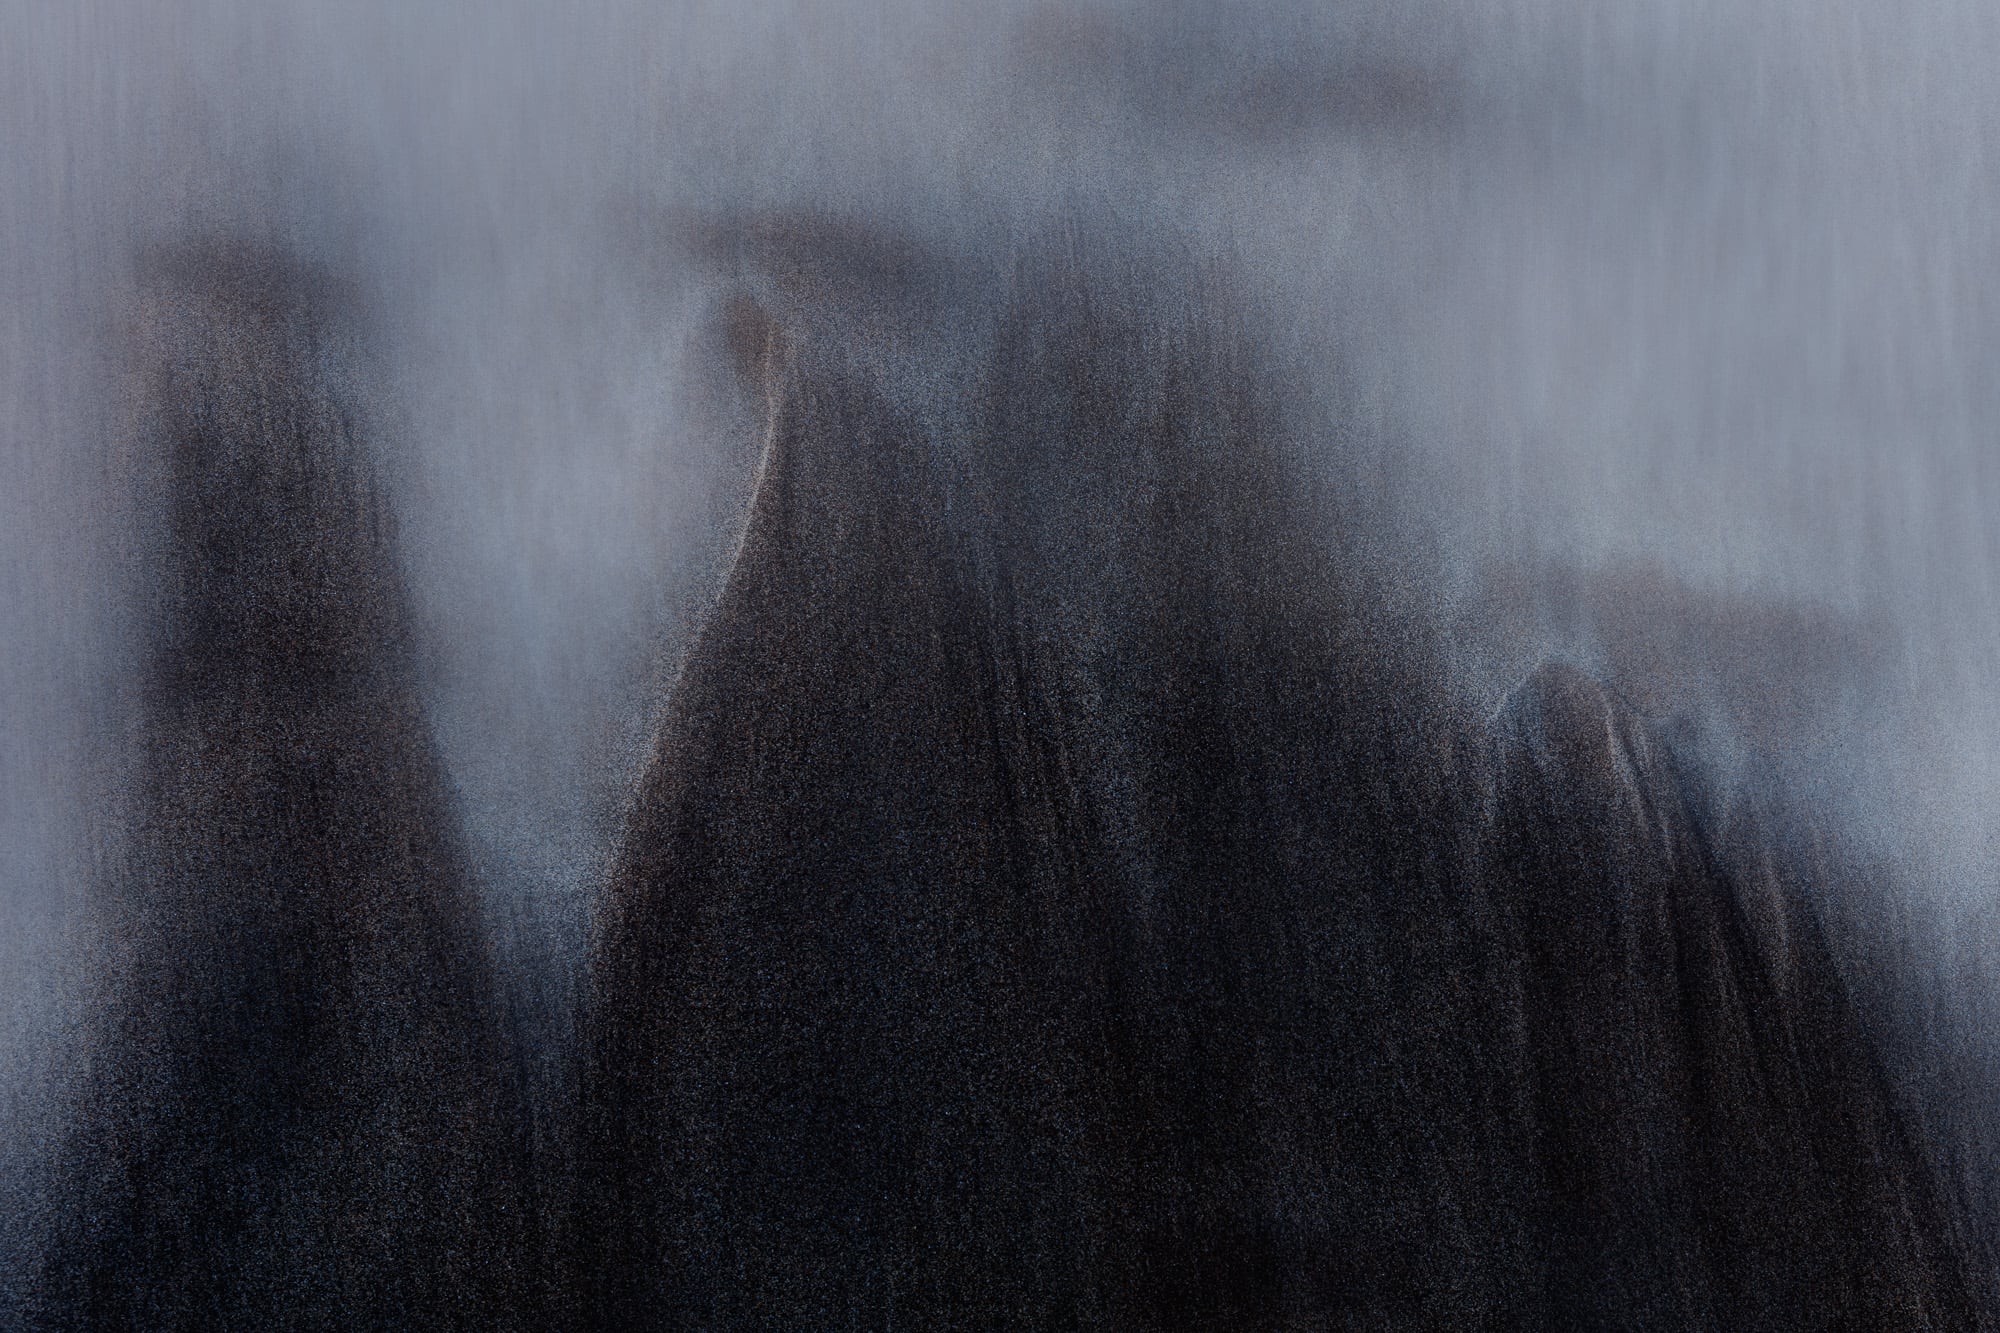 Abstract image of sand dunes in Ayries Inlet, Victoria, resembling mountain peaks in a mist-like effect.